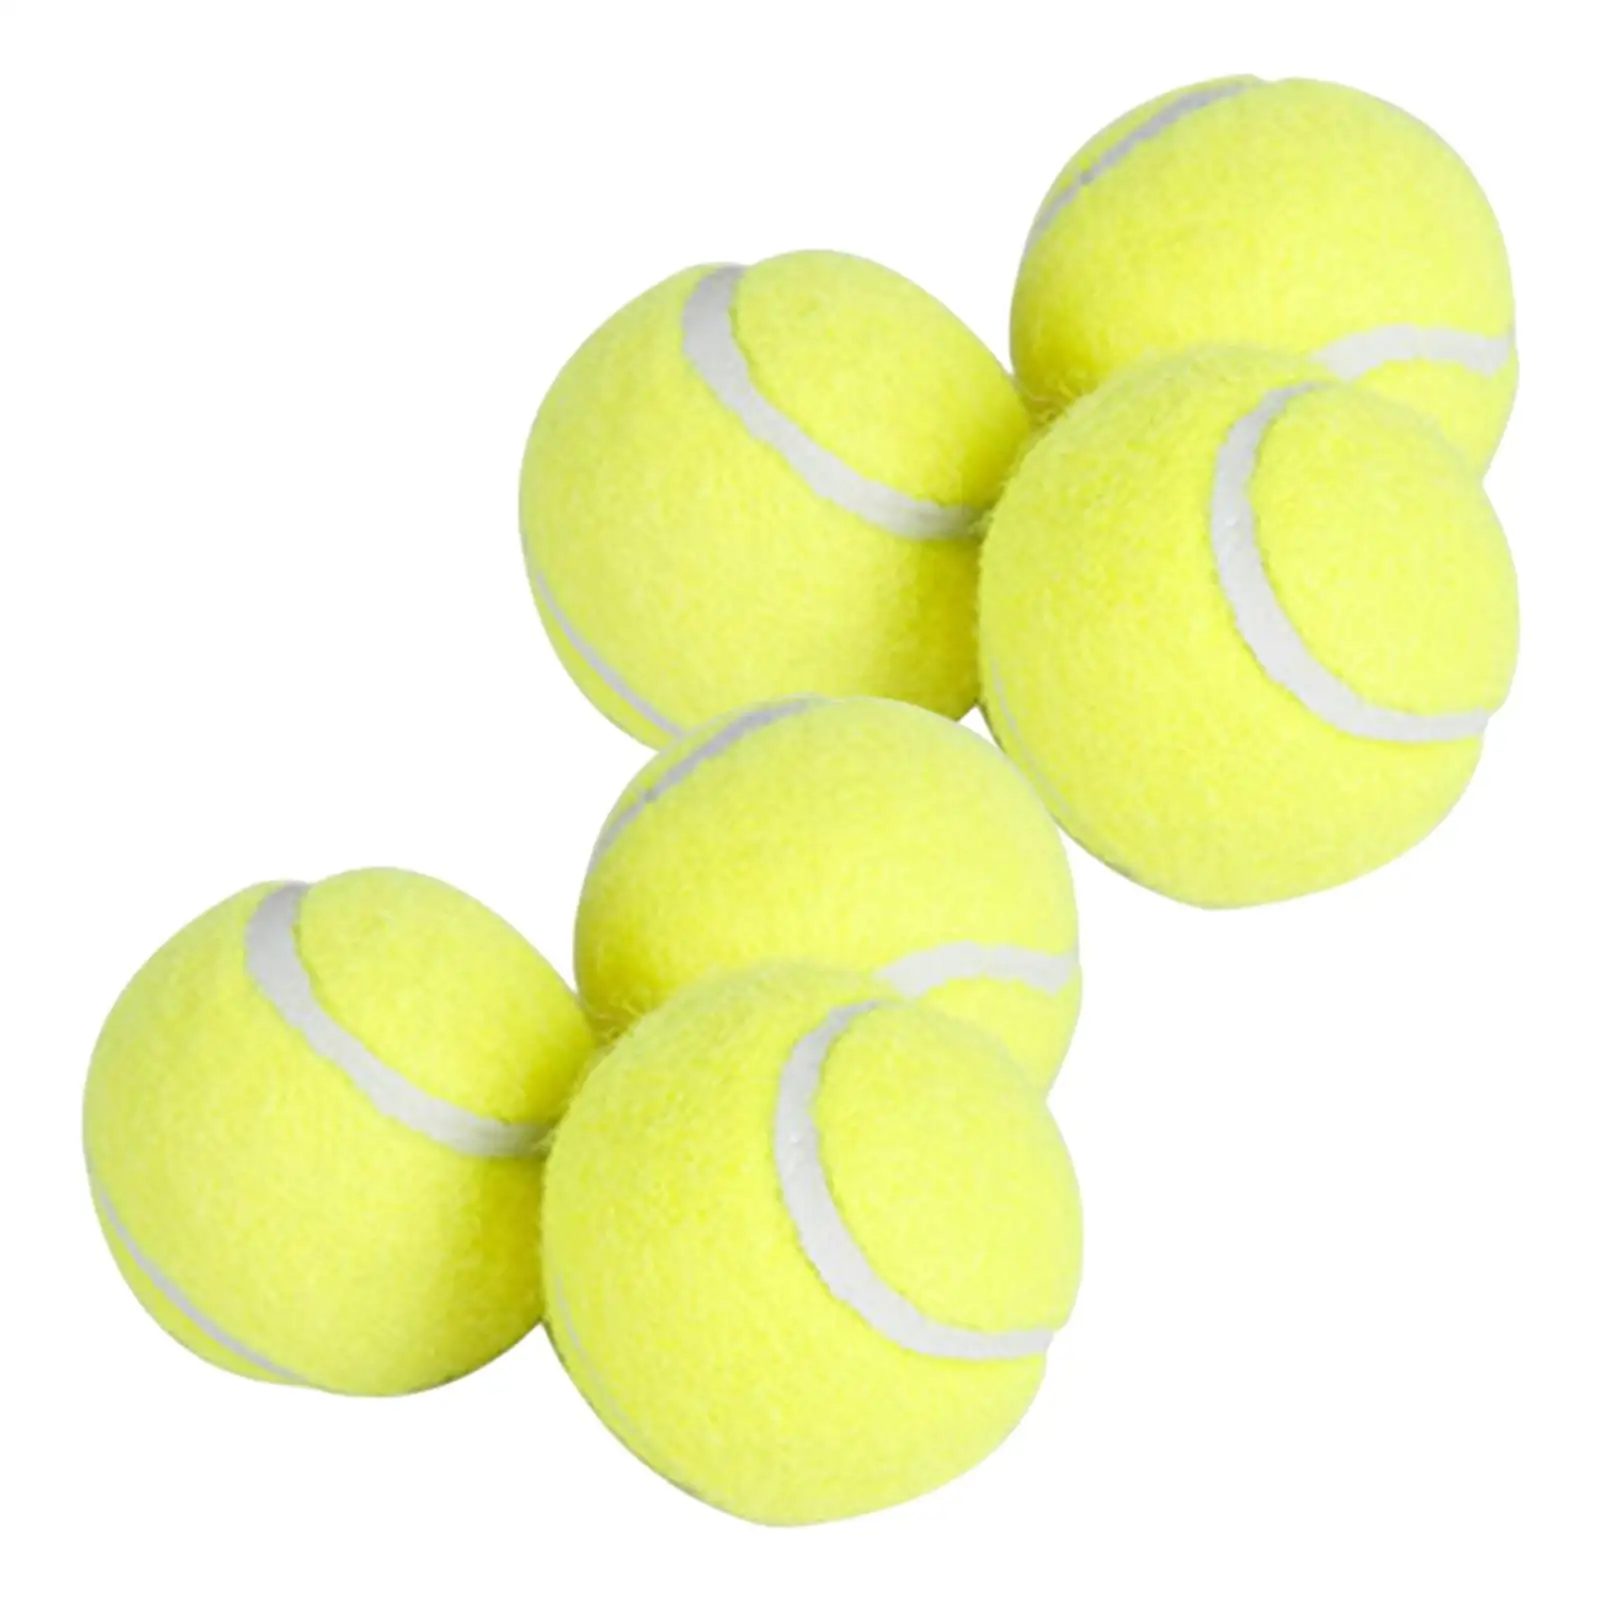 s s,  Balls s Durable to Exercise and Playing,  Bright Colors Rubber Dog Balls   Ball Launcher